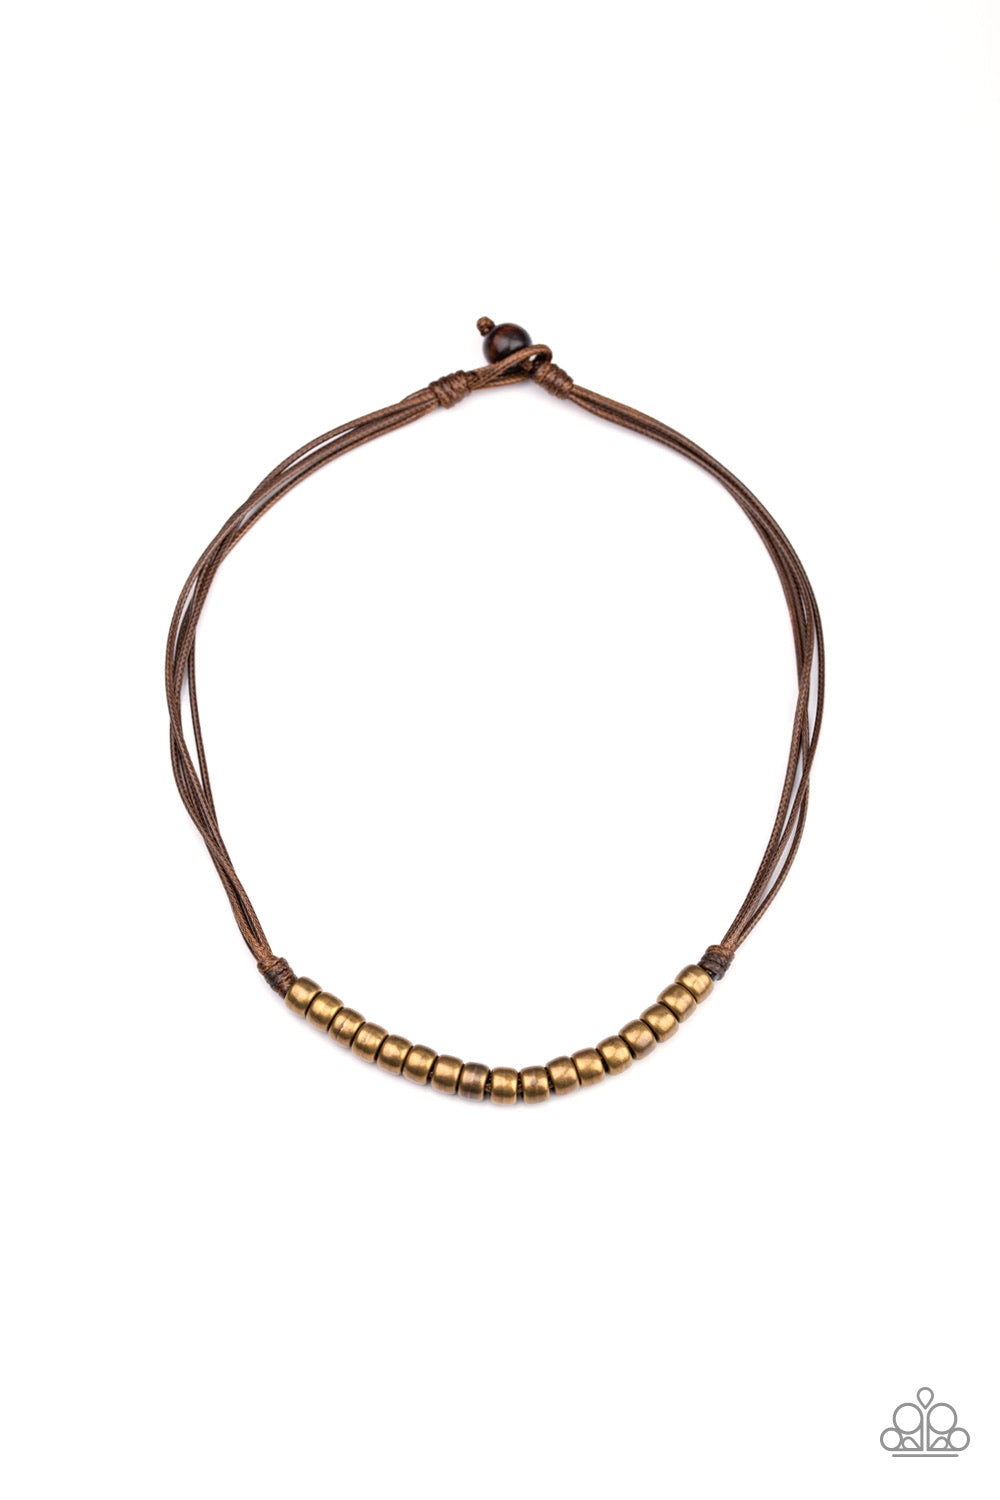 On The TREASURE Hunt Brown-Urban Necklace